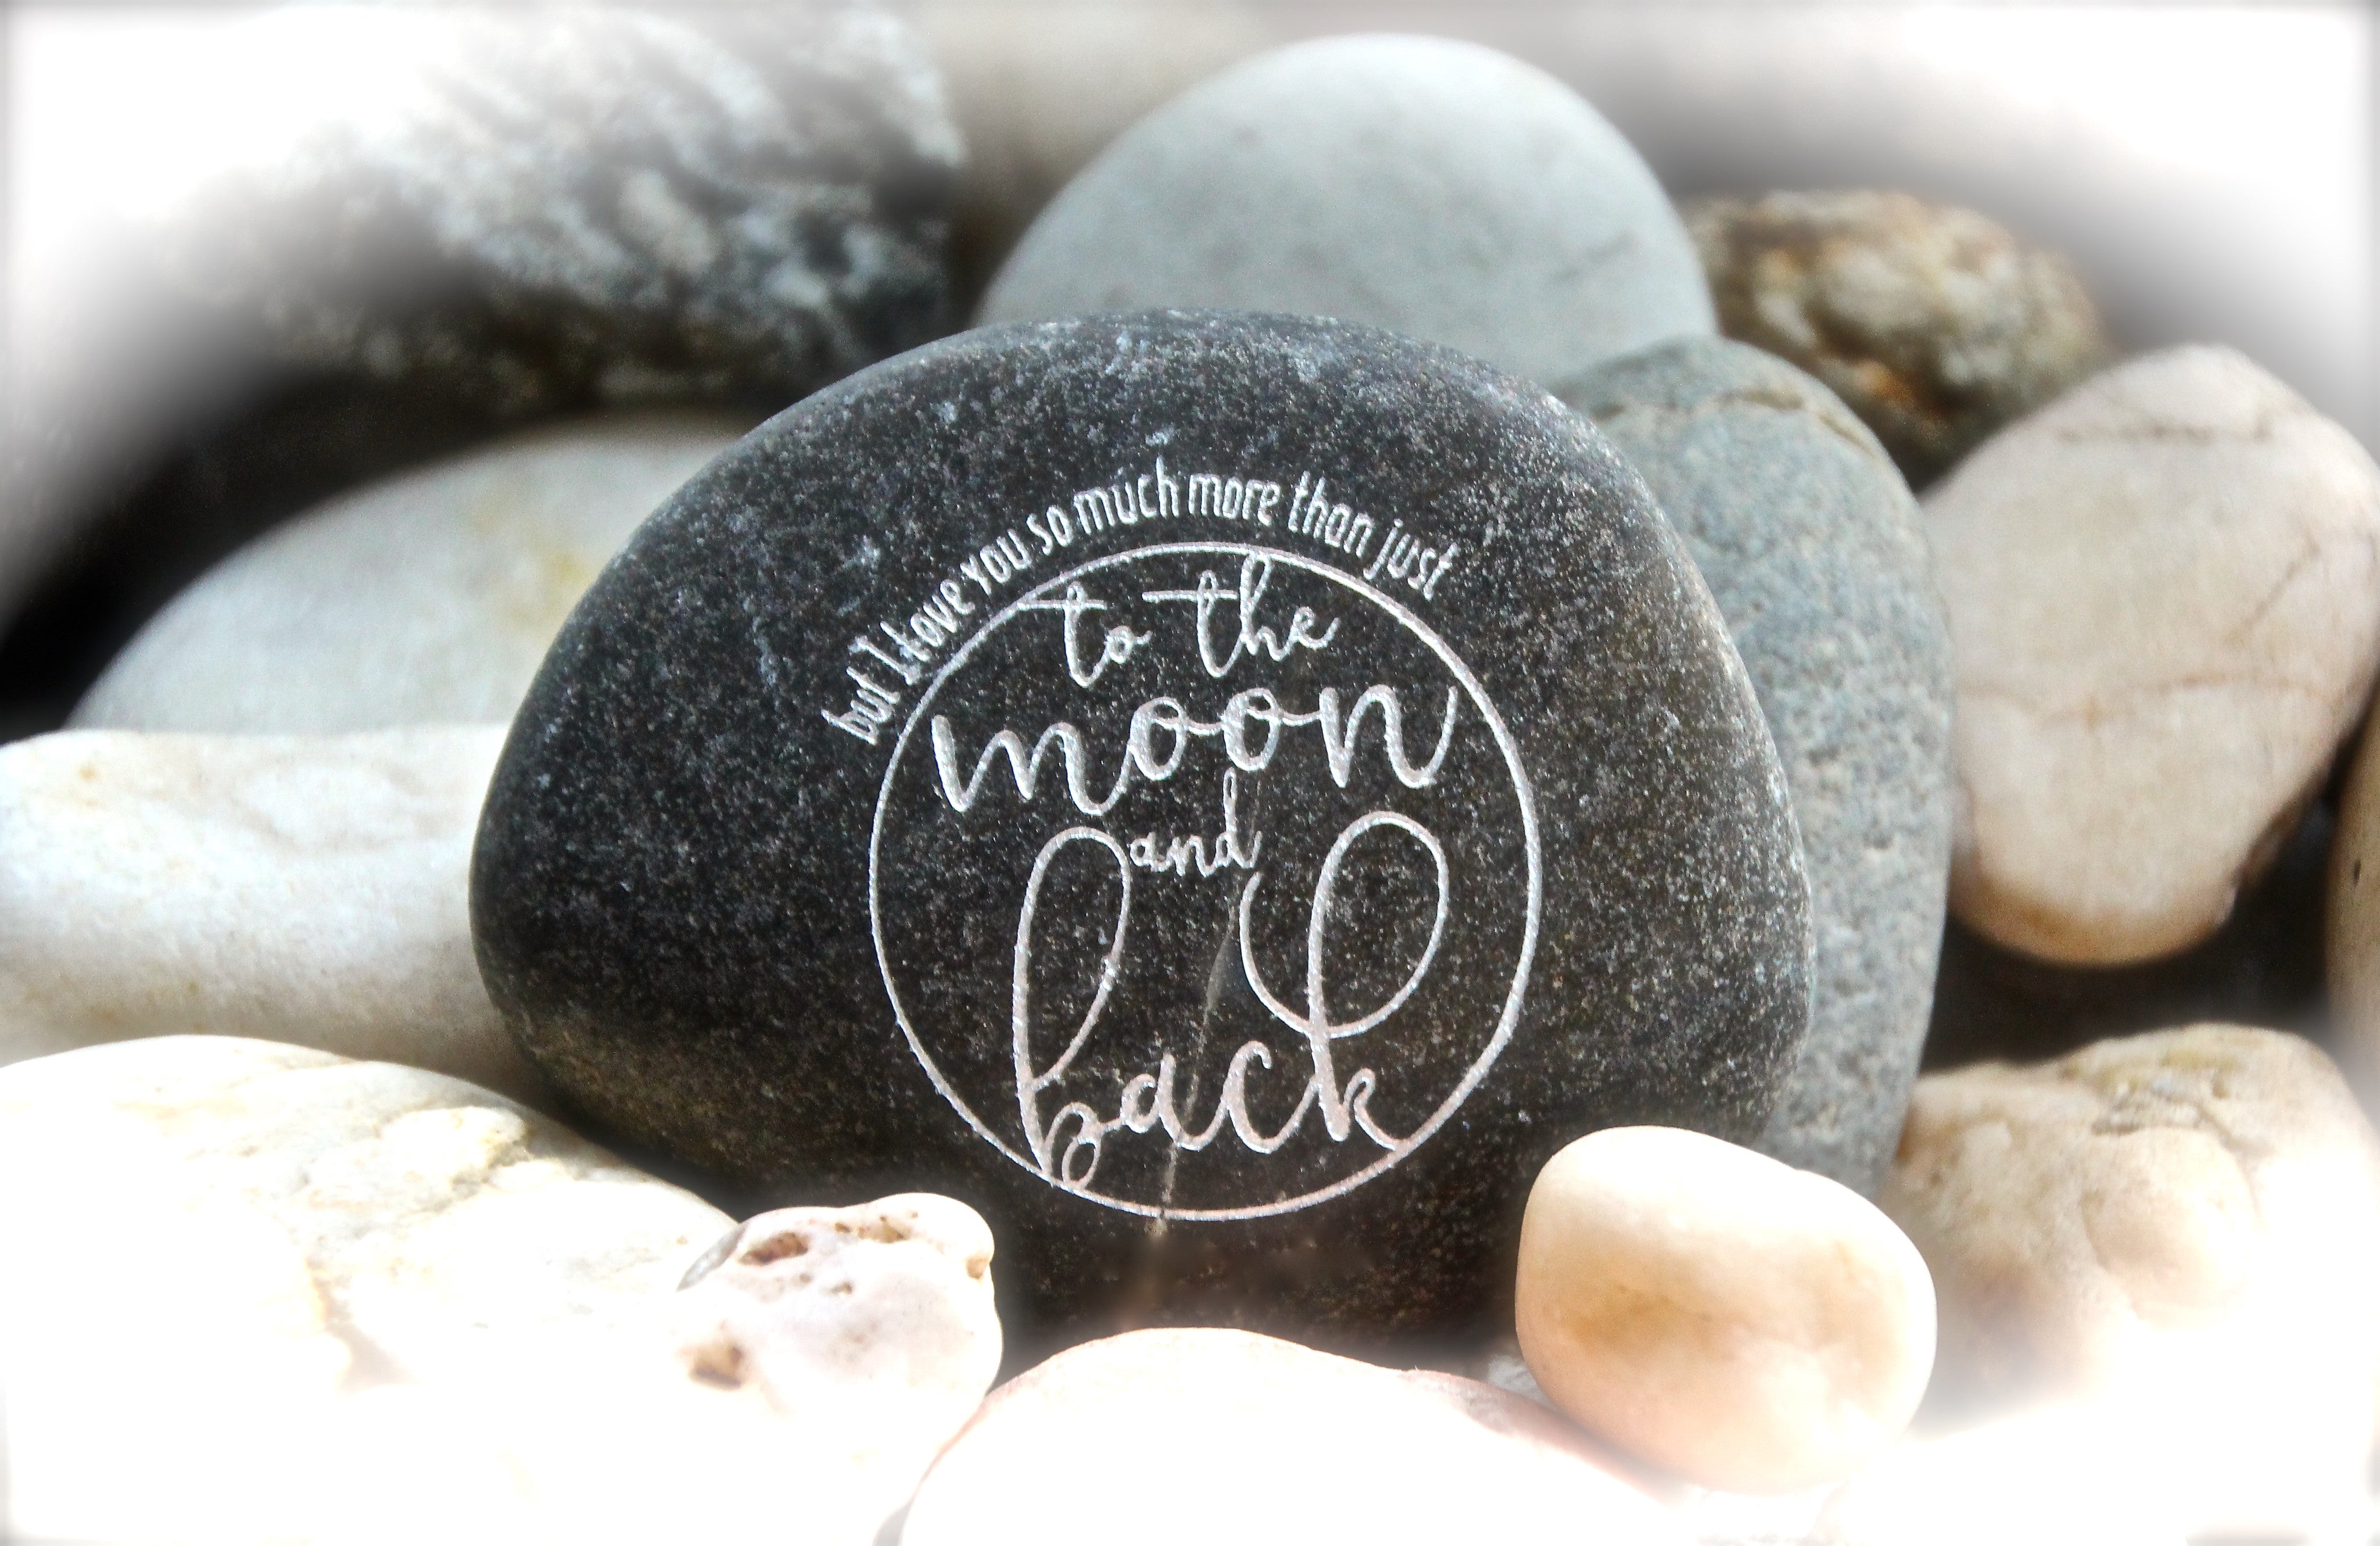  I love You So Much More Than Just To The Moon And Back Engraved Rock Inspirational Gift